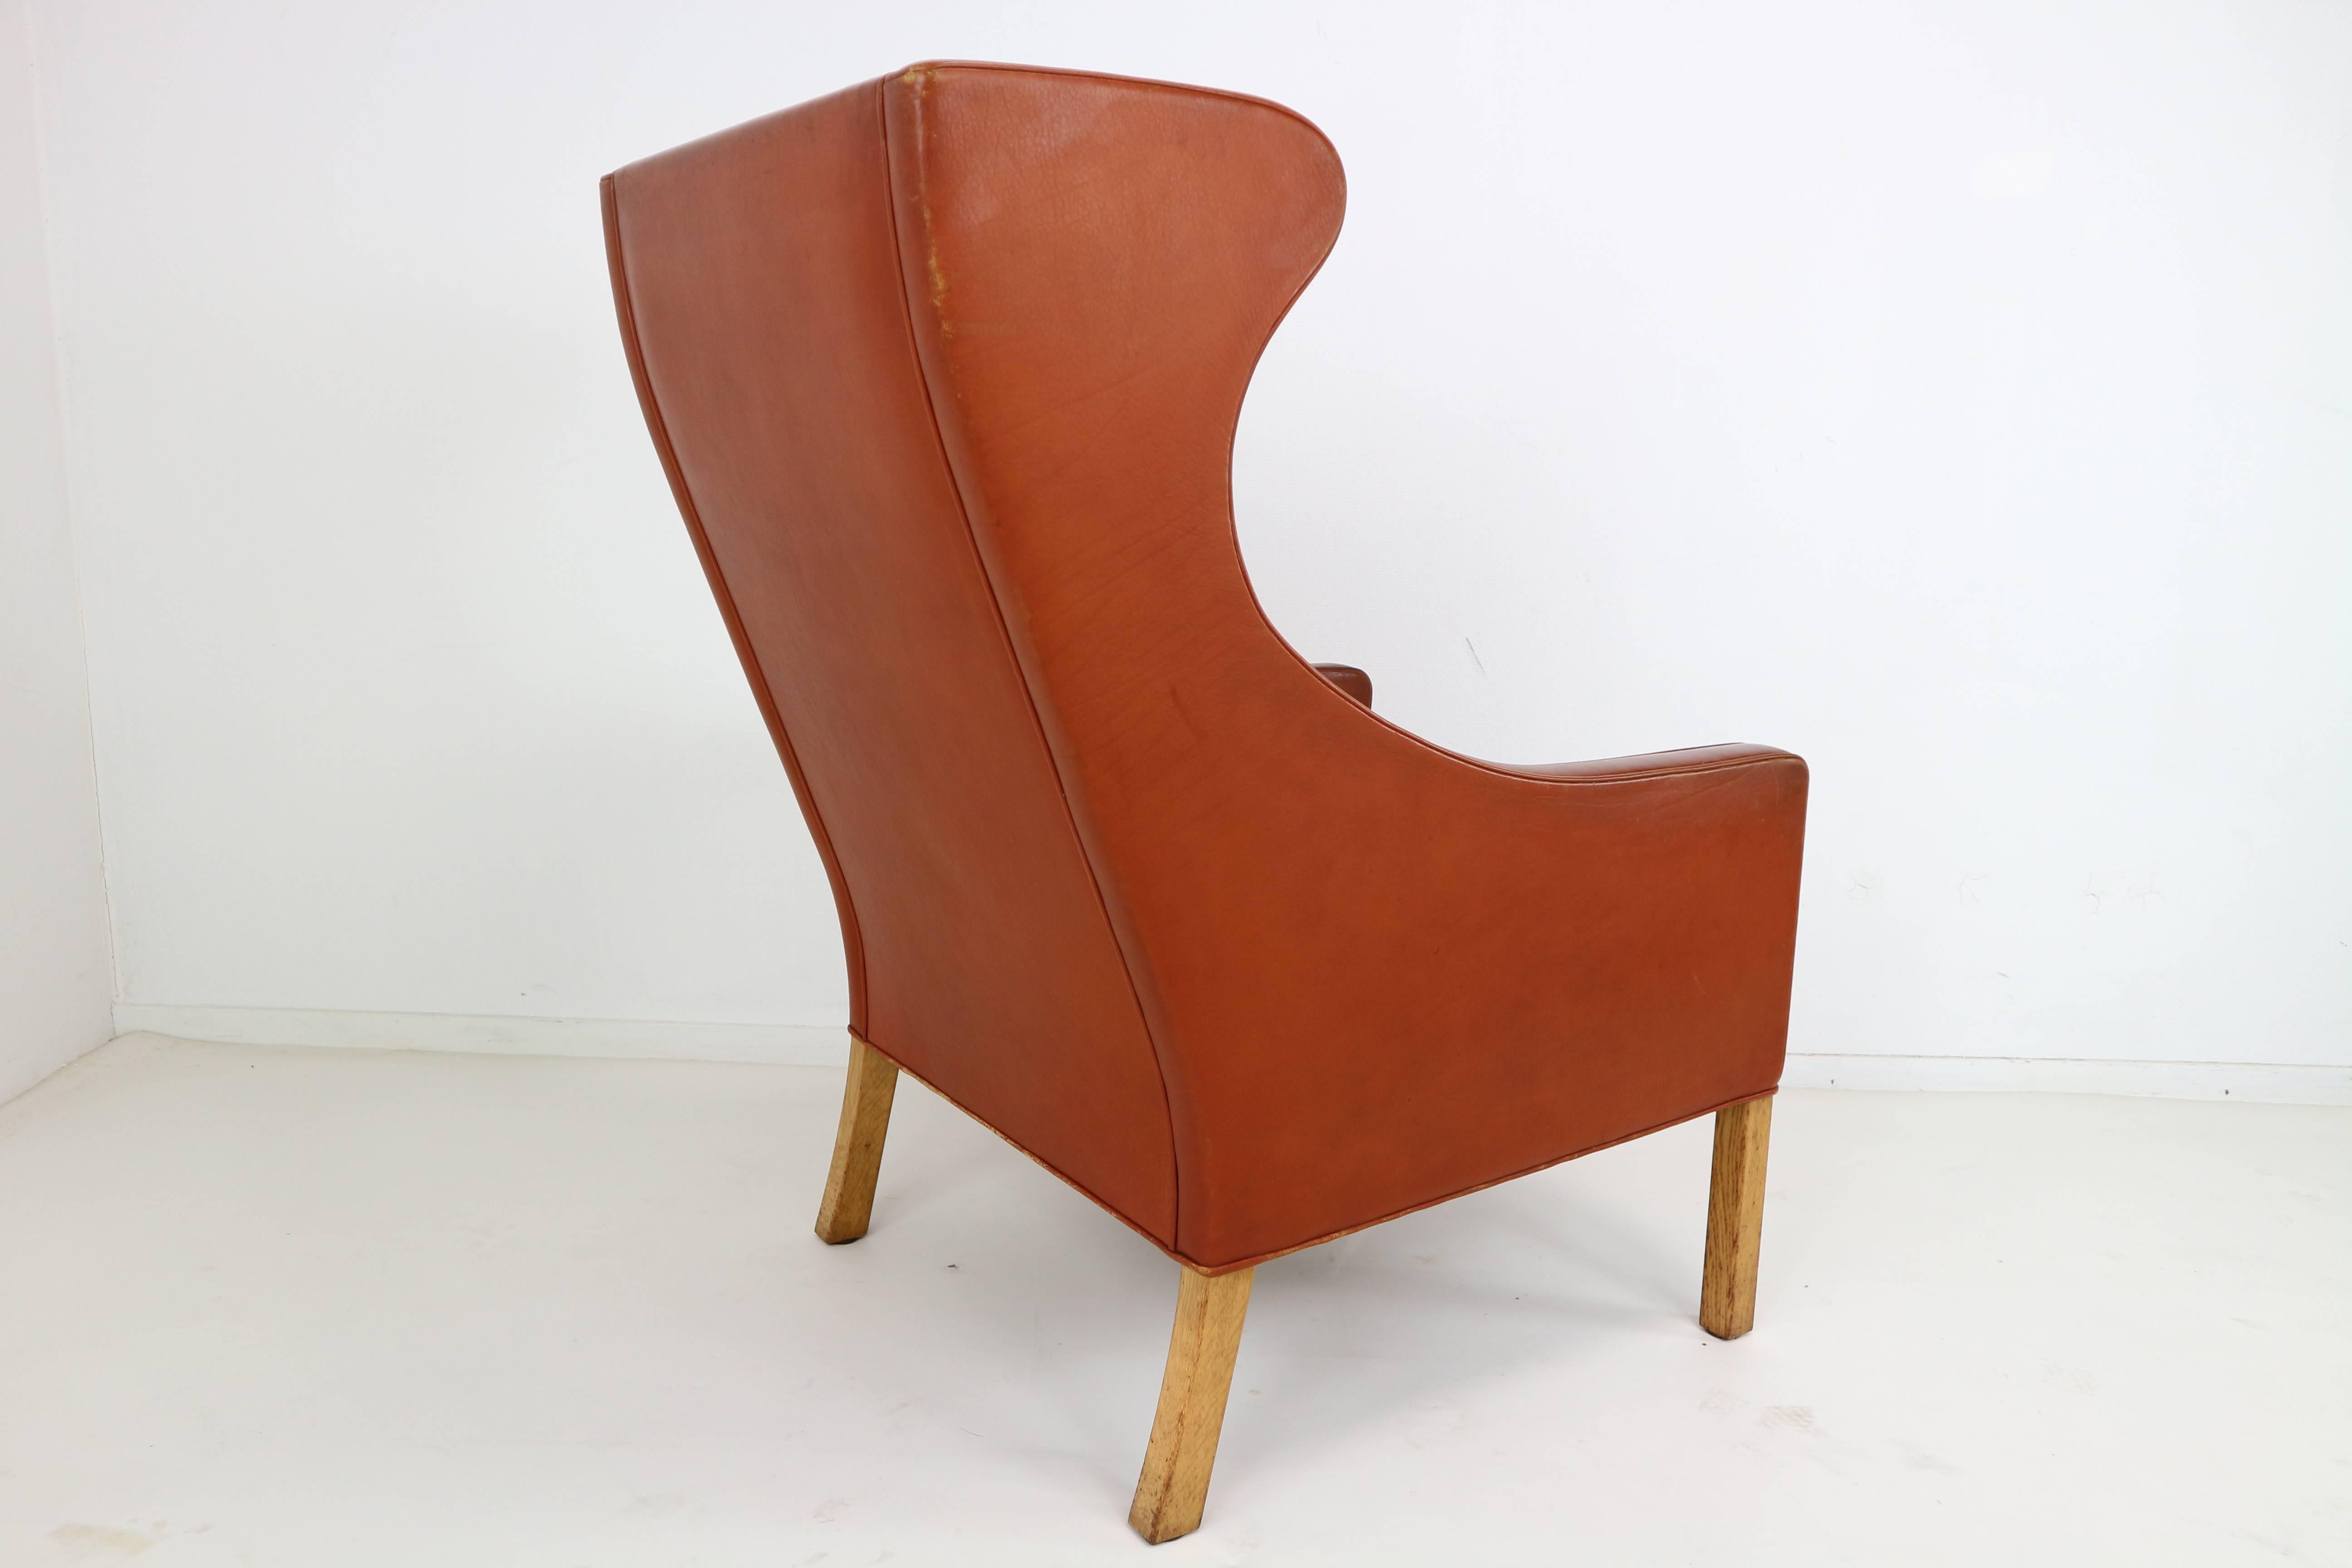 Danish 2204 Wingback Lounge Chair by Børge Mogensen for Fredericia Stolefabrik